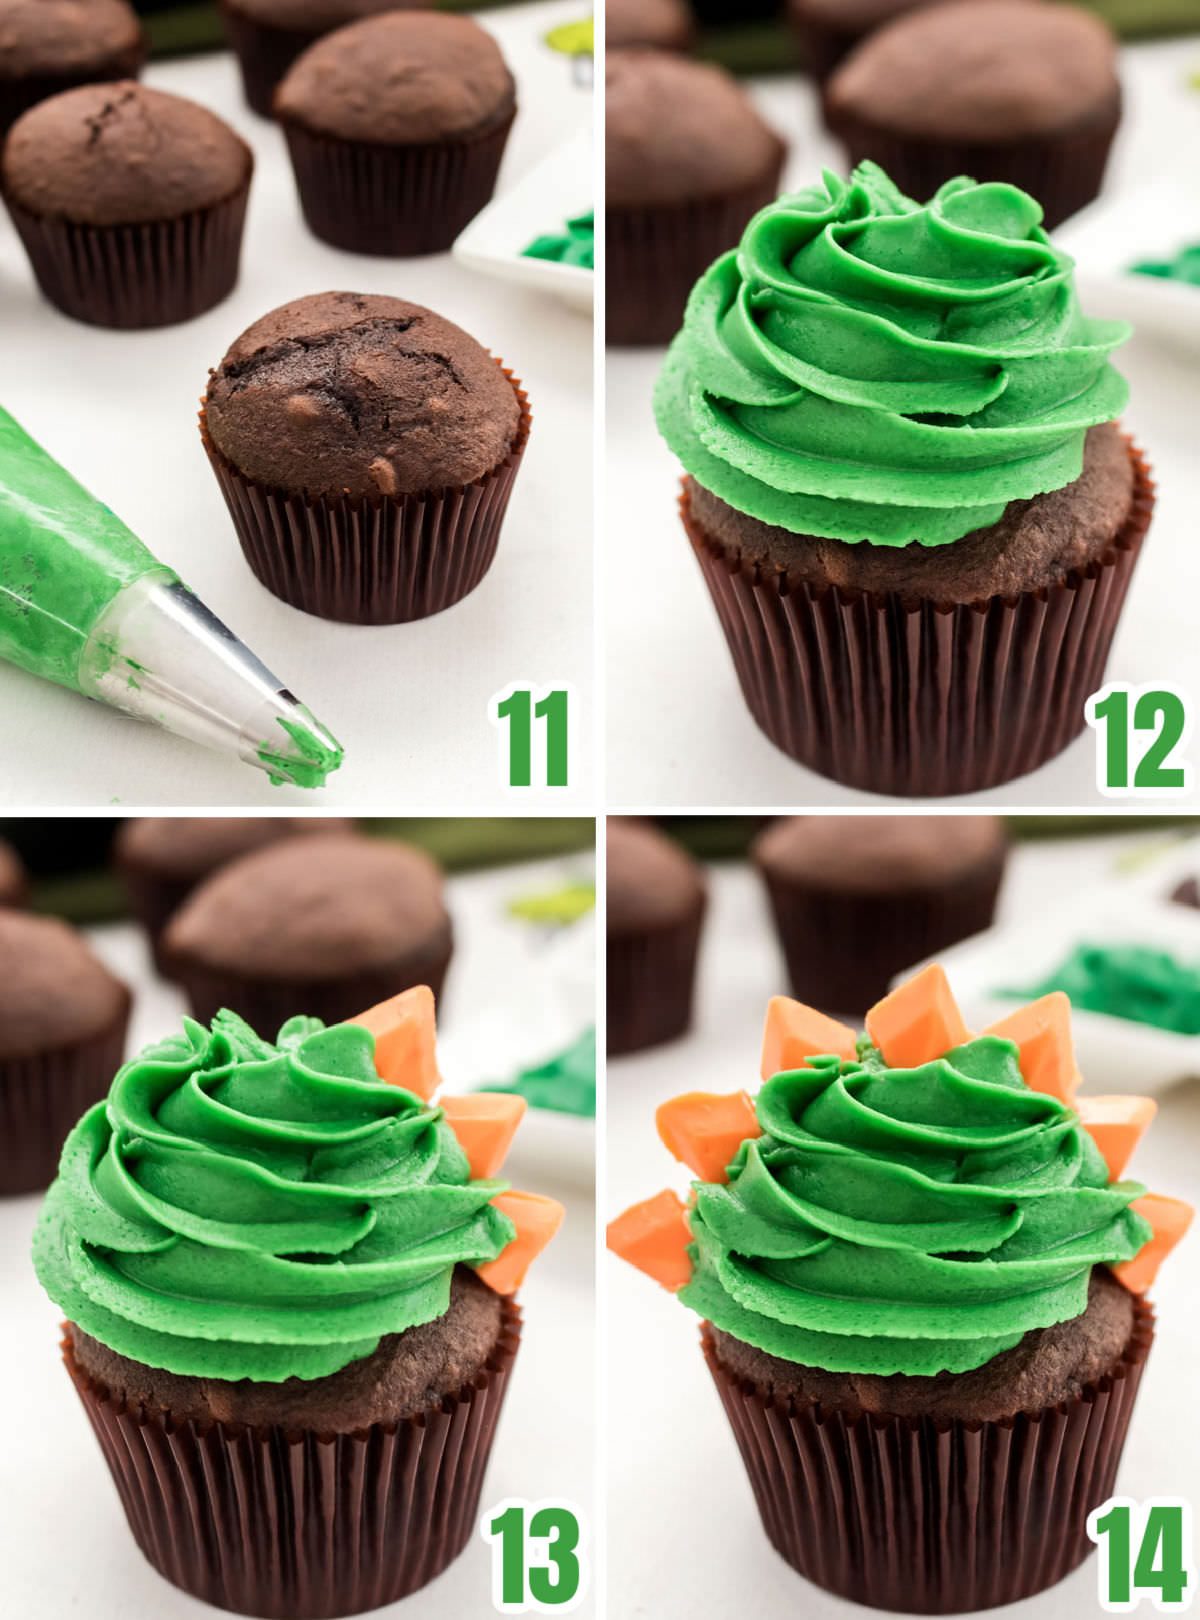 Collage image showing the steps for decorating the Dinosaur Cupcakes.